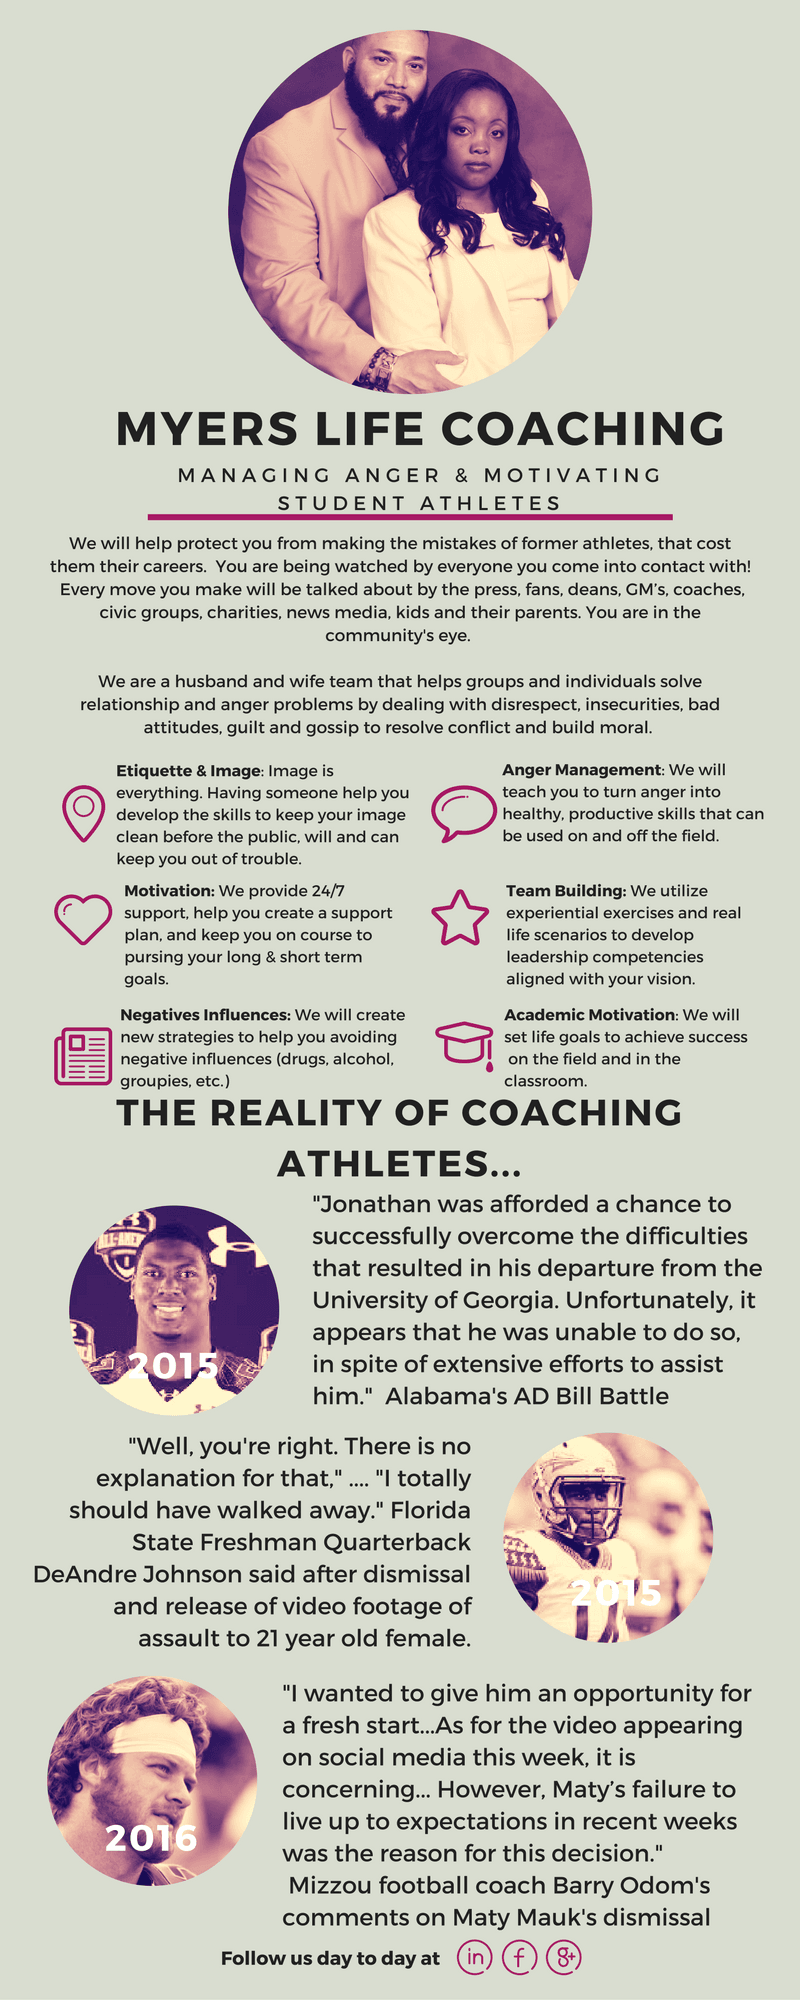 Athletic Coaching For Student Athletes